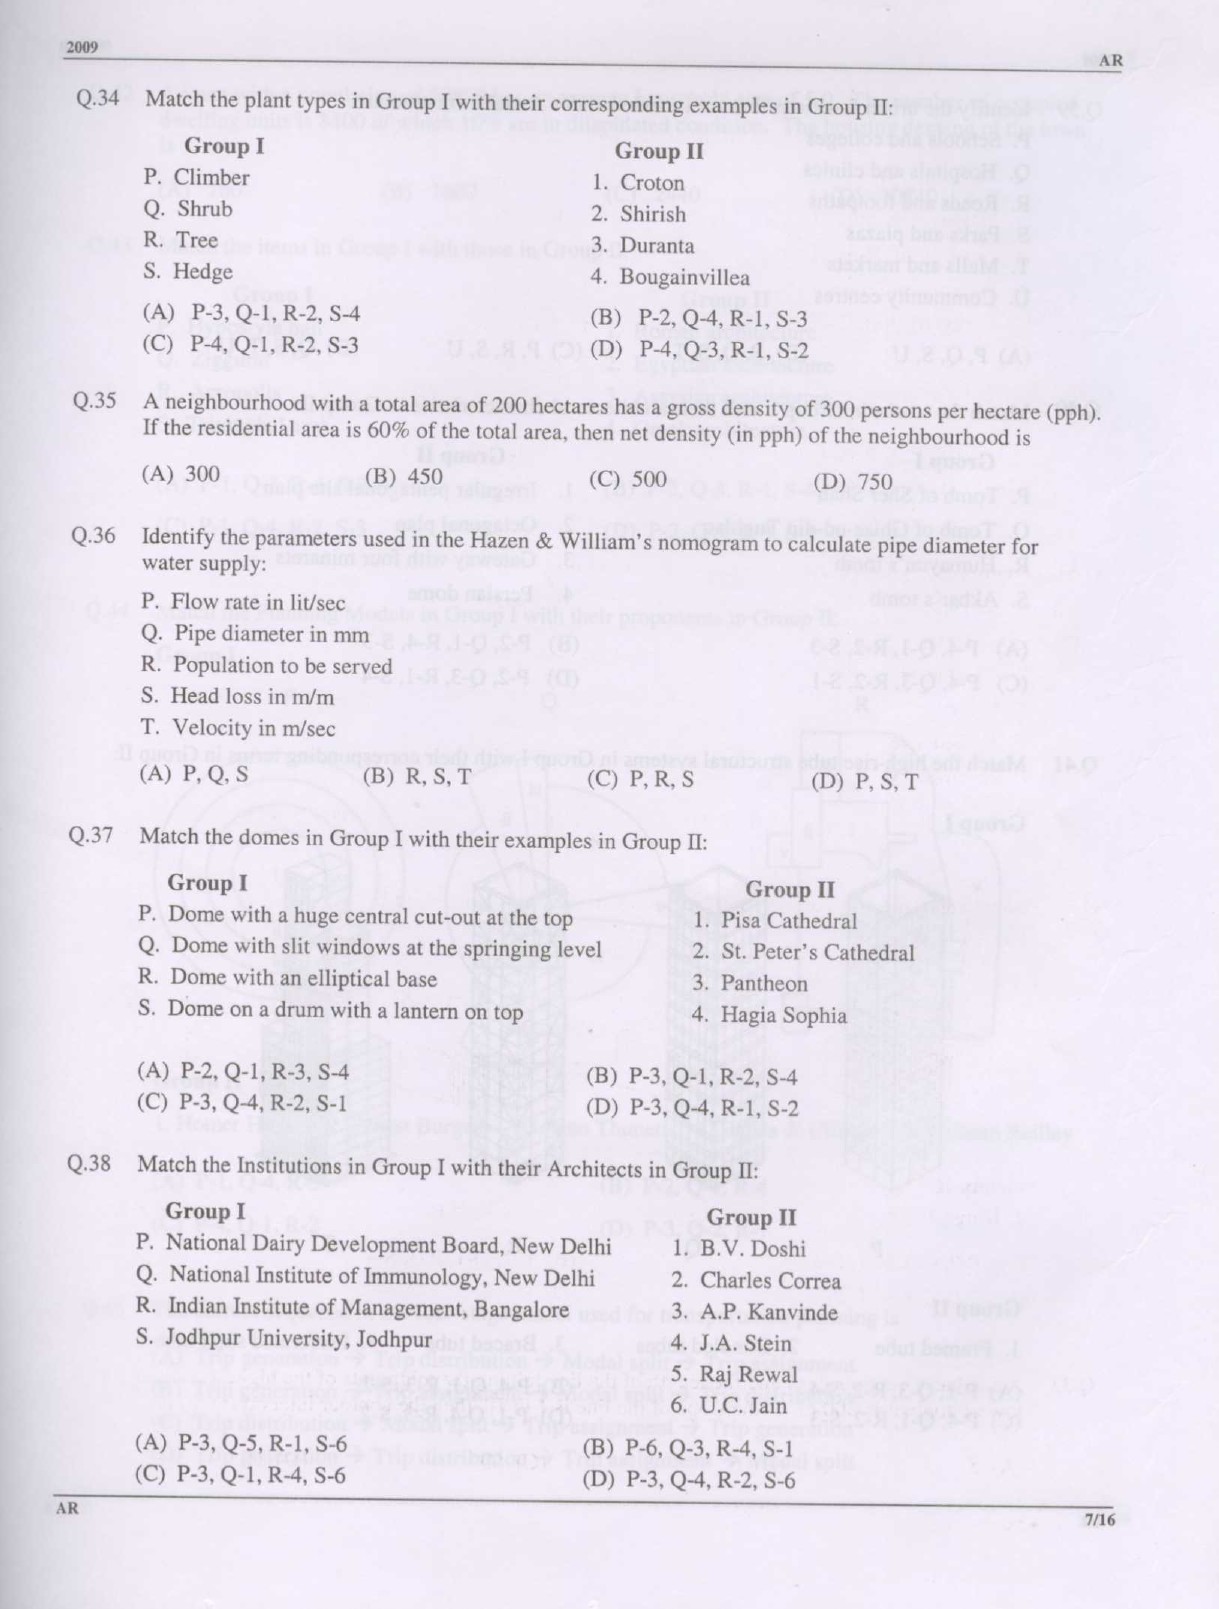 GATE Exam Question Paper 2009 Architecture and Planning 7